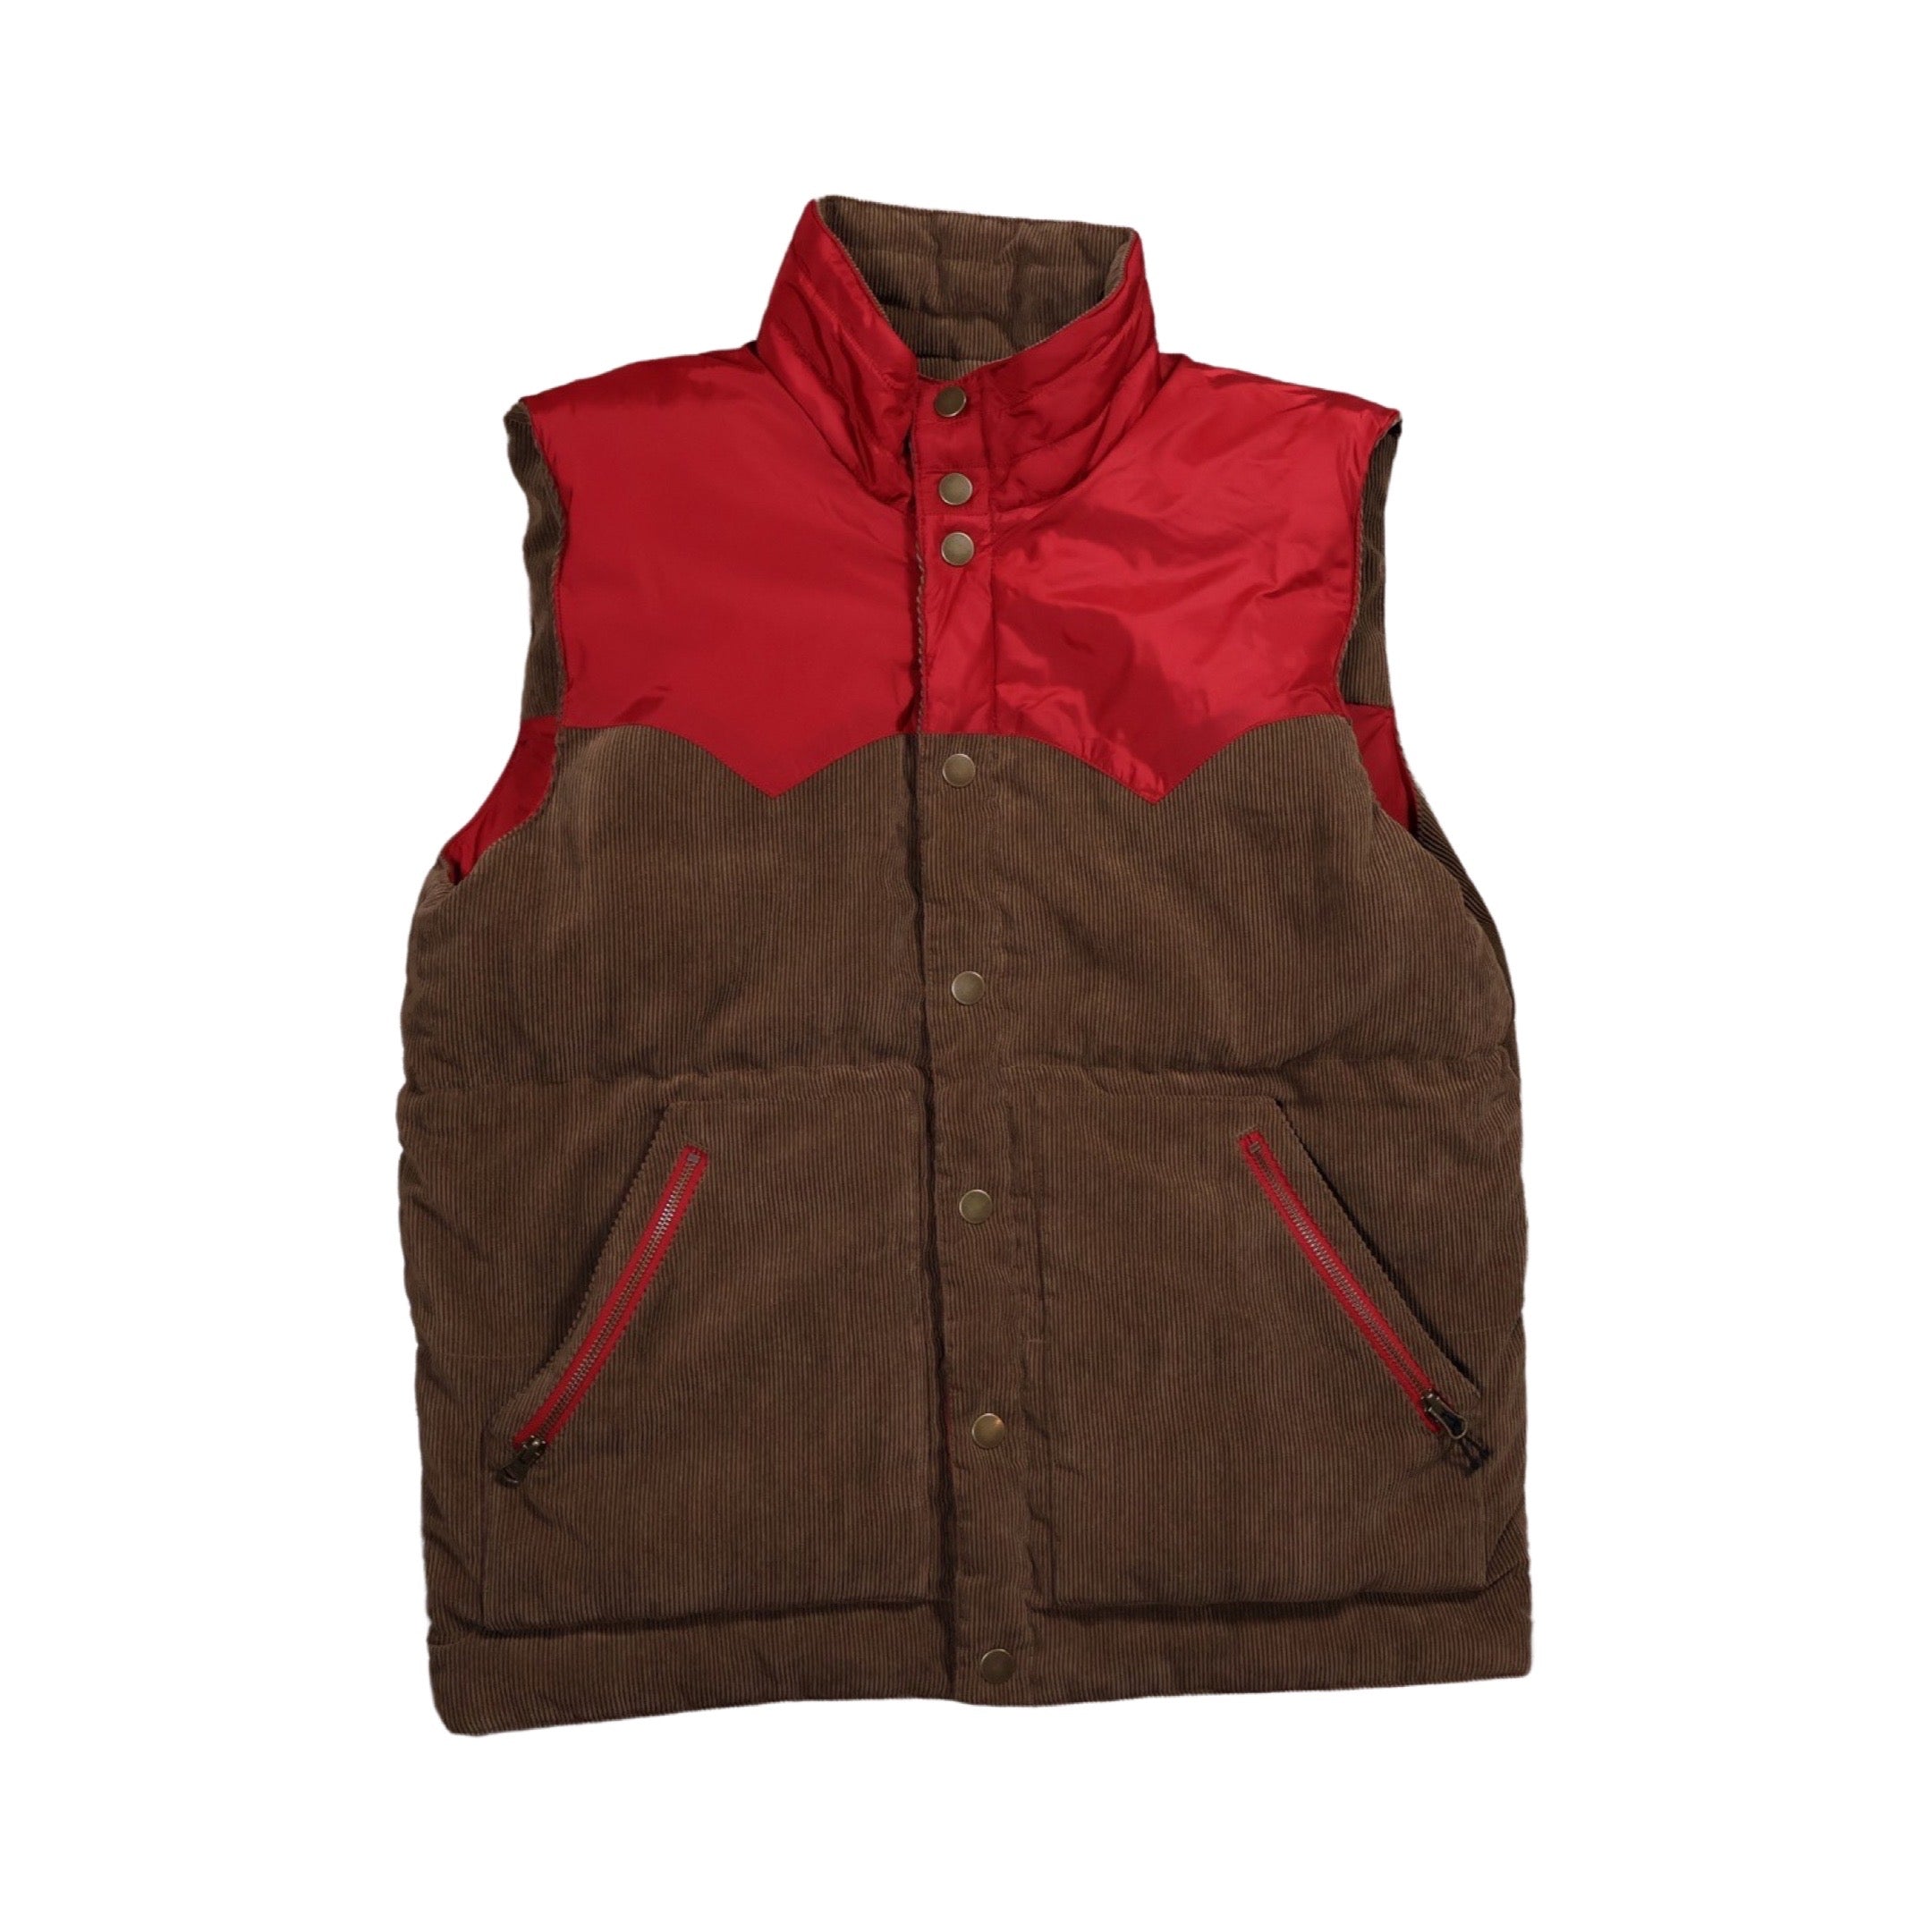 Reversible Red/Brown Puffer Vest (Large)